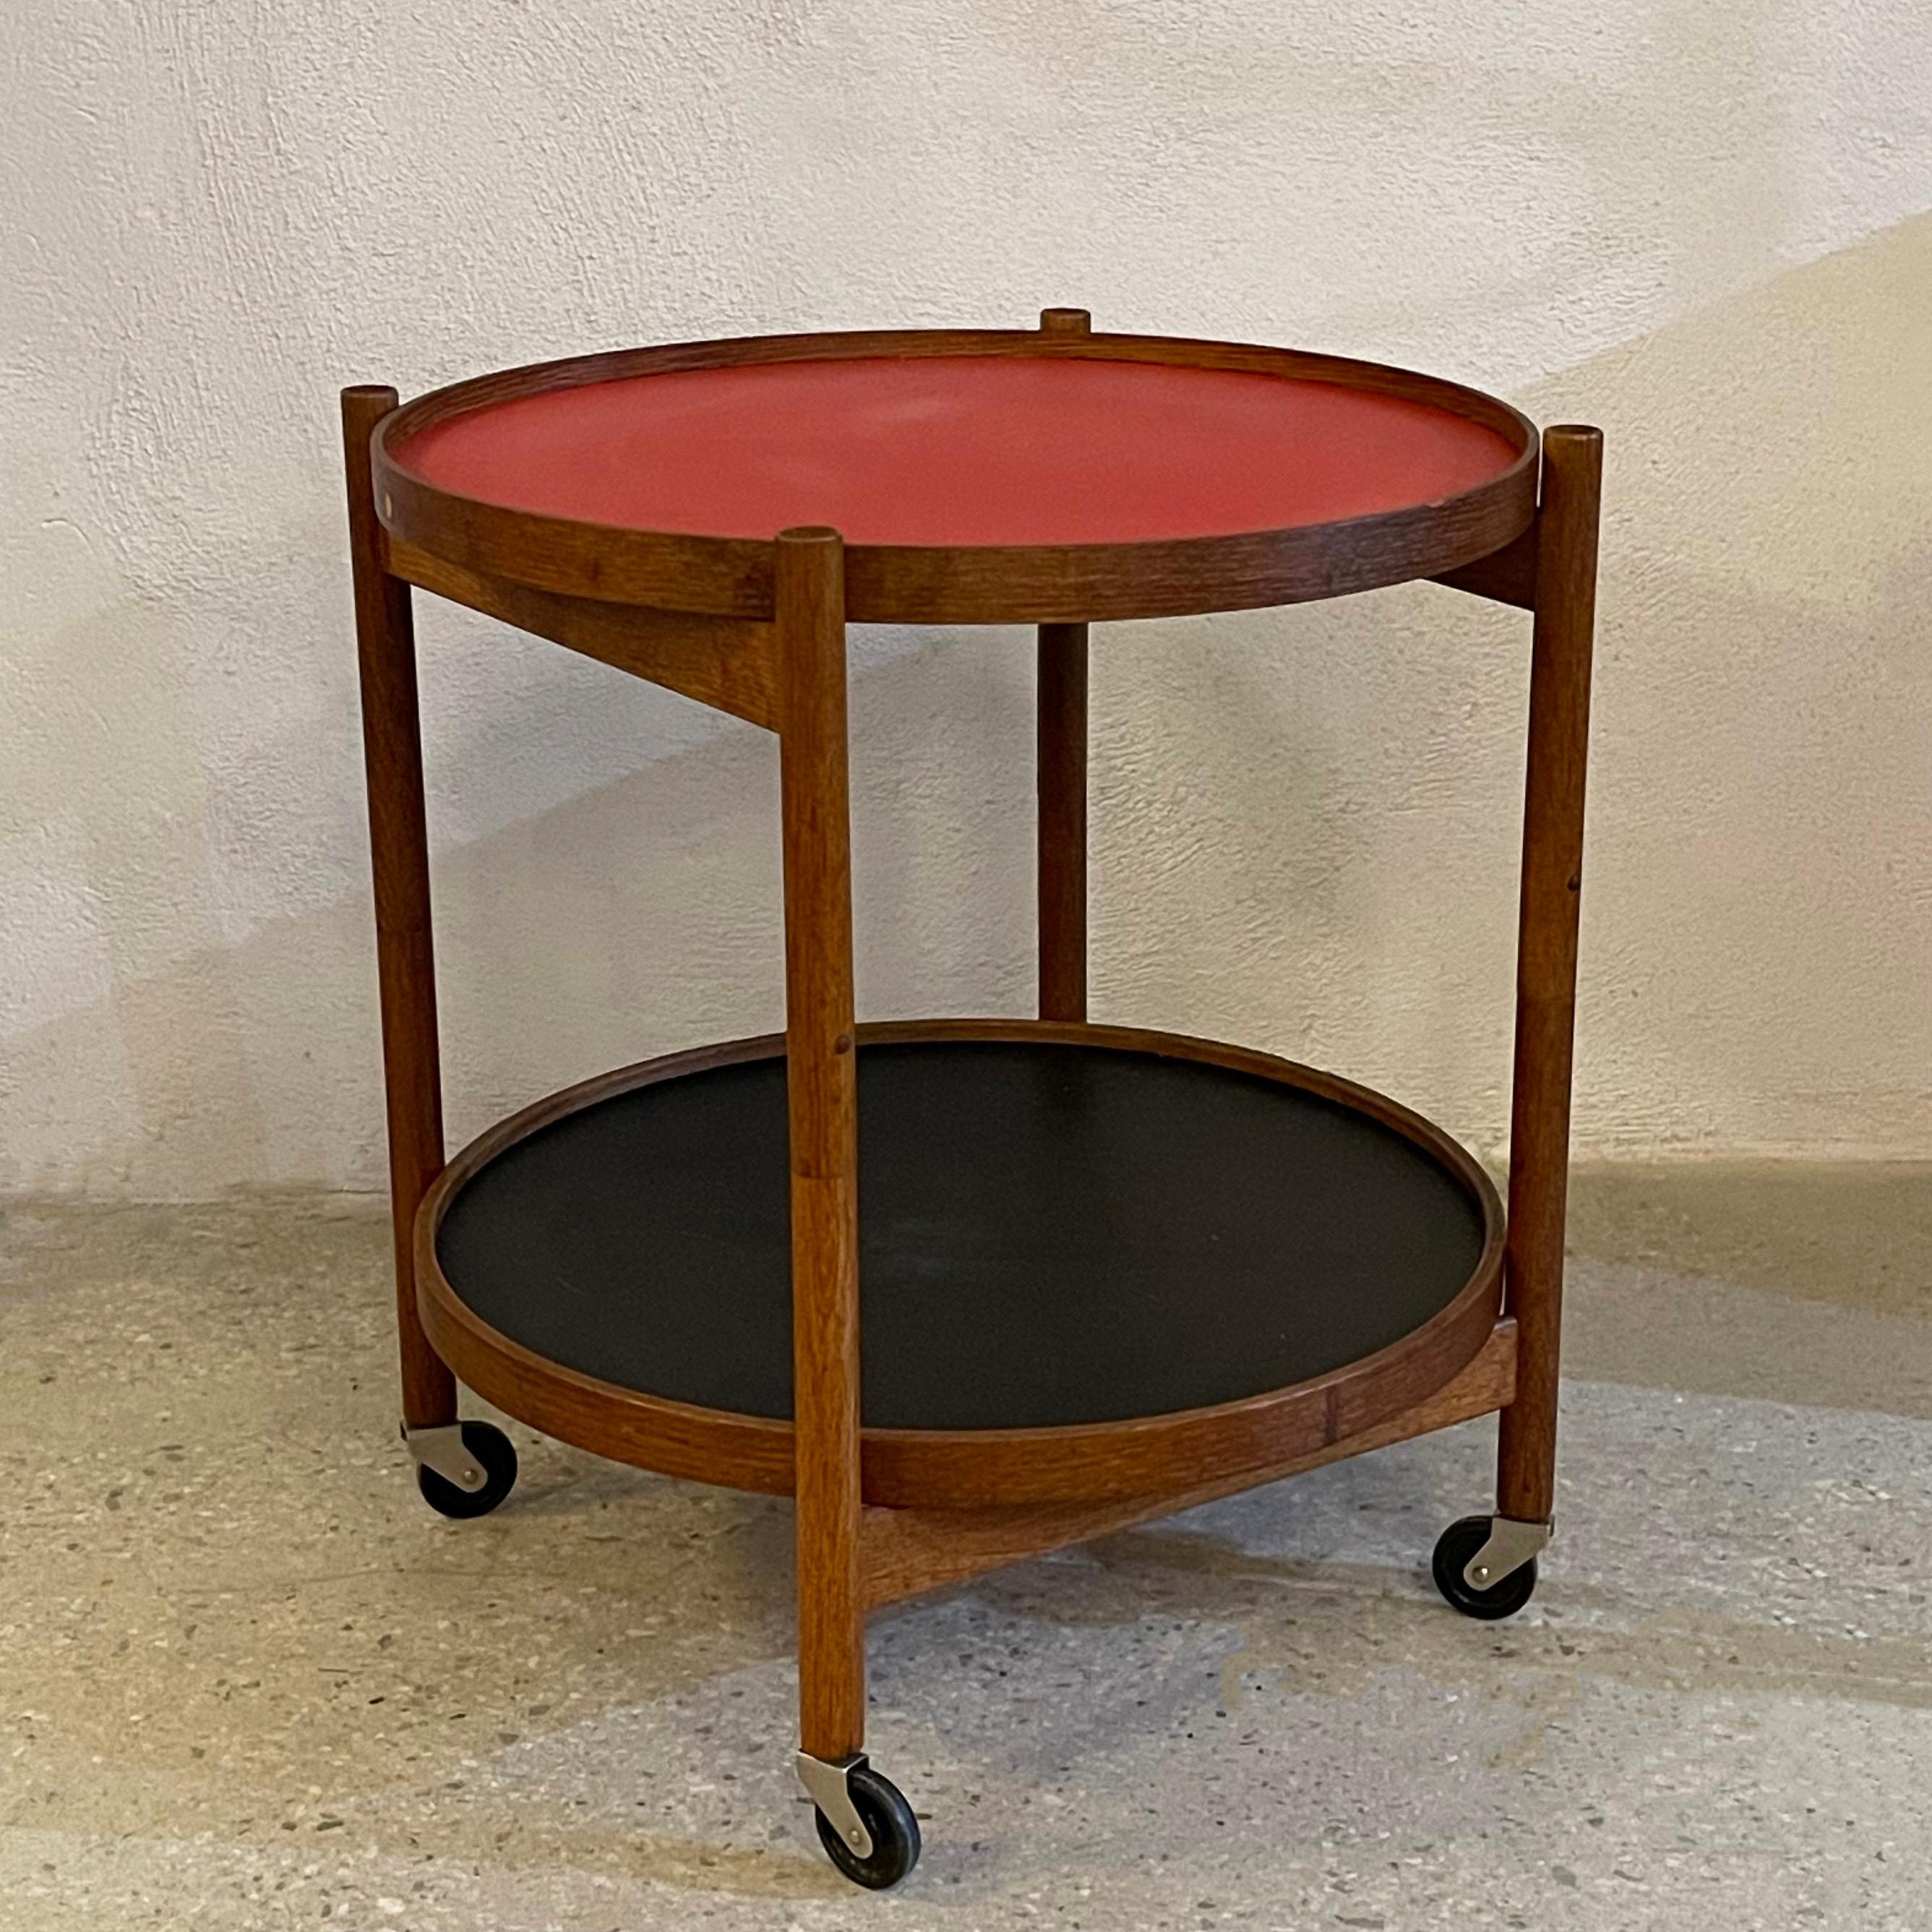 Scandinavian modern, rolling, bar or serving cart trolley by Danish architect Hans Bølling for Torben Ørskov features two oak trimmed, round reversible trays that are lacquered red on one side and black on the other that fit into a collasping oak